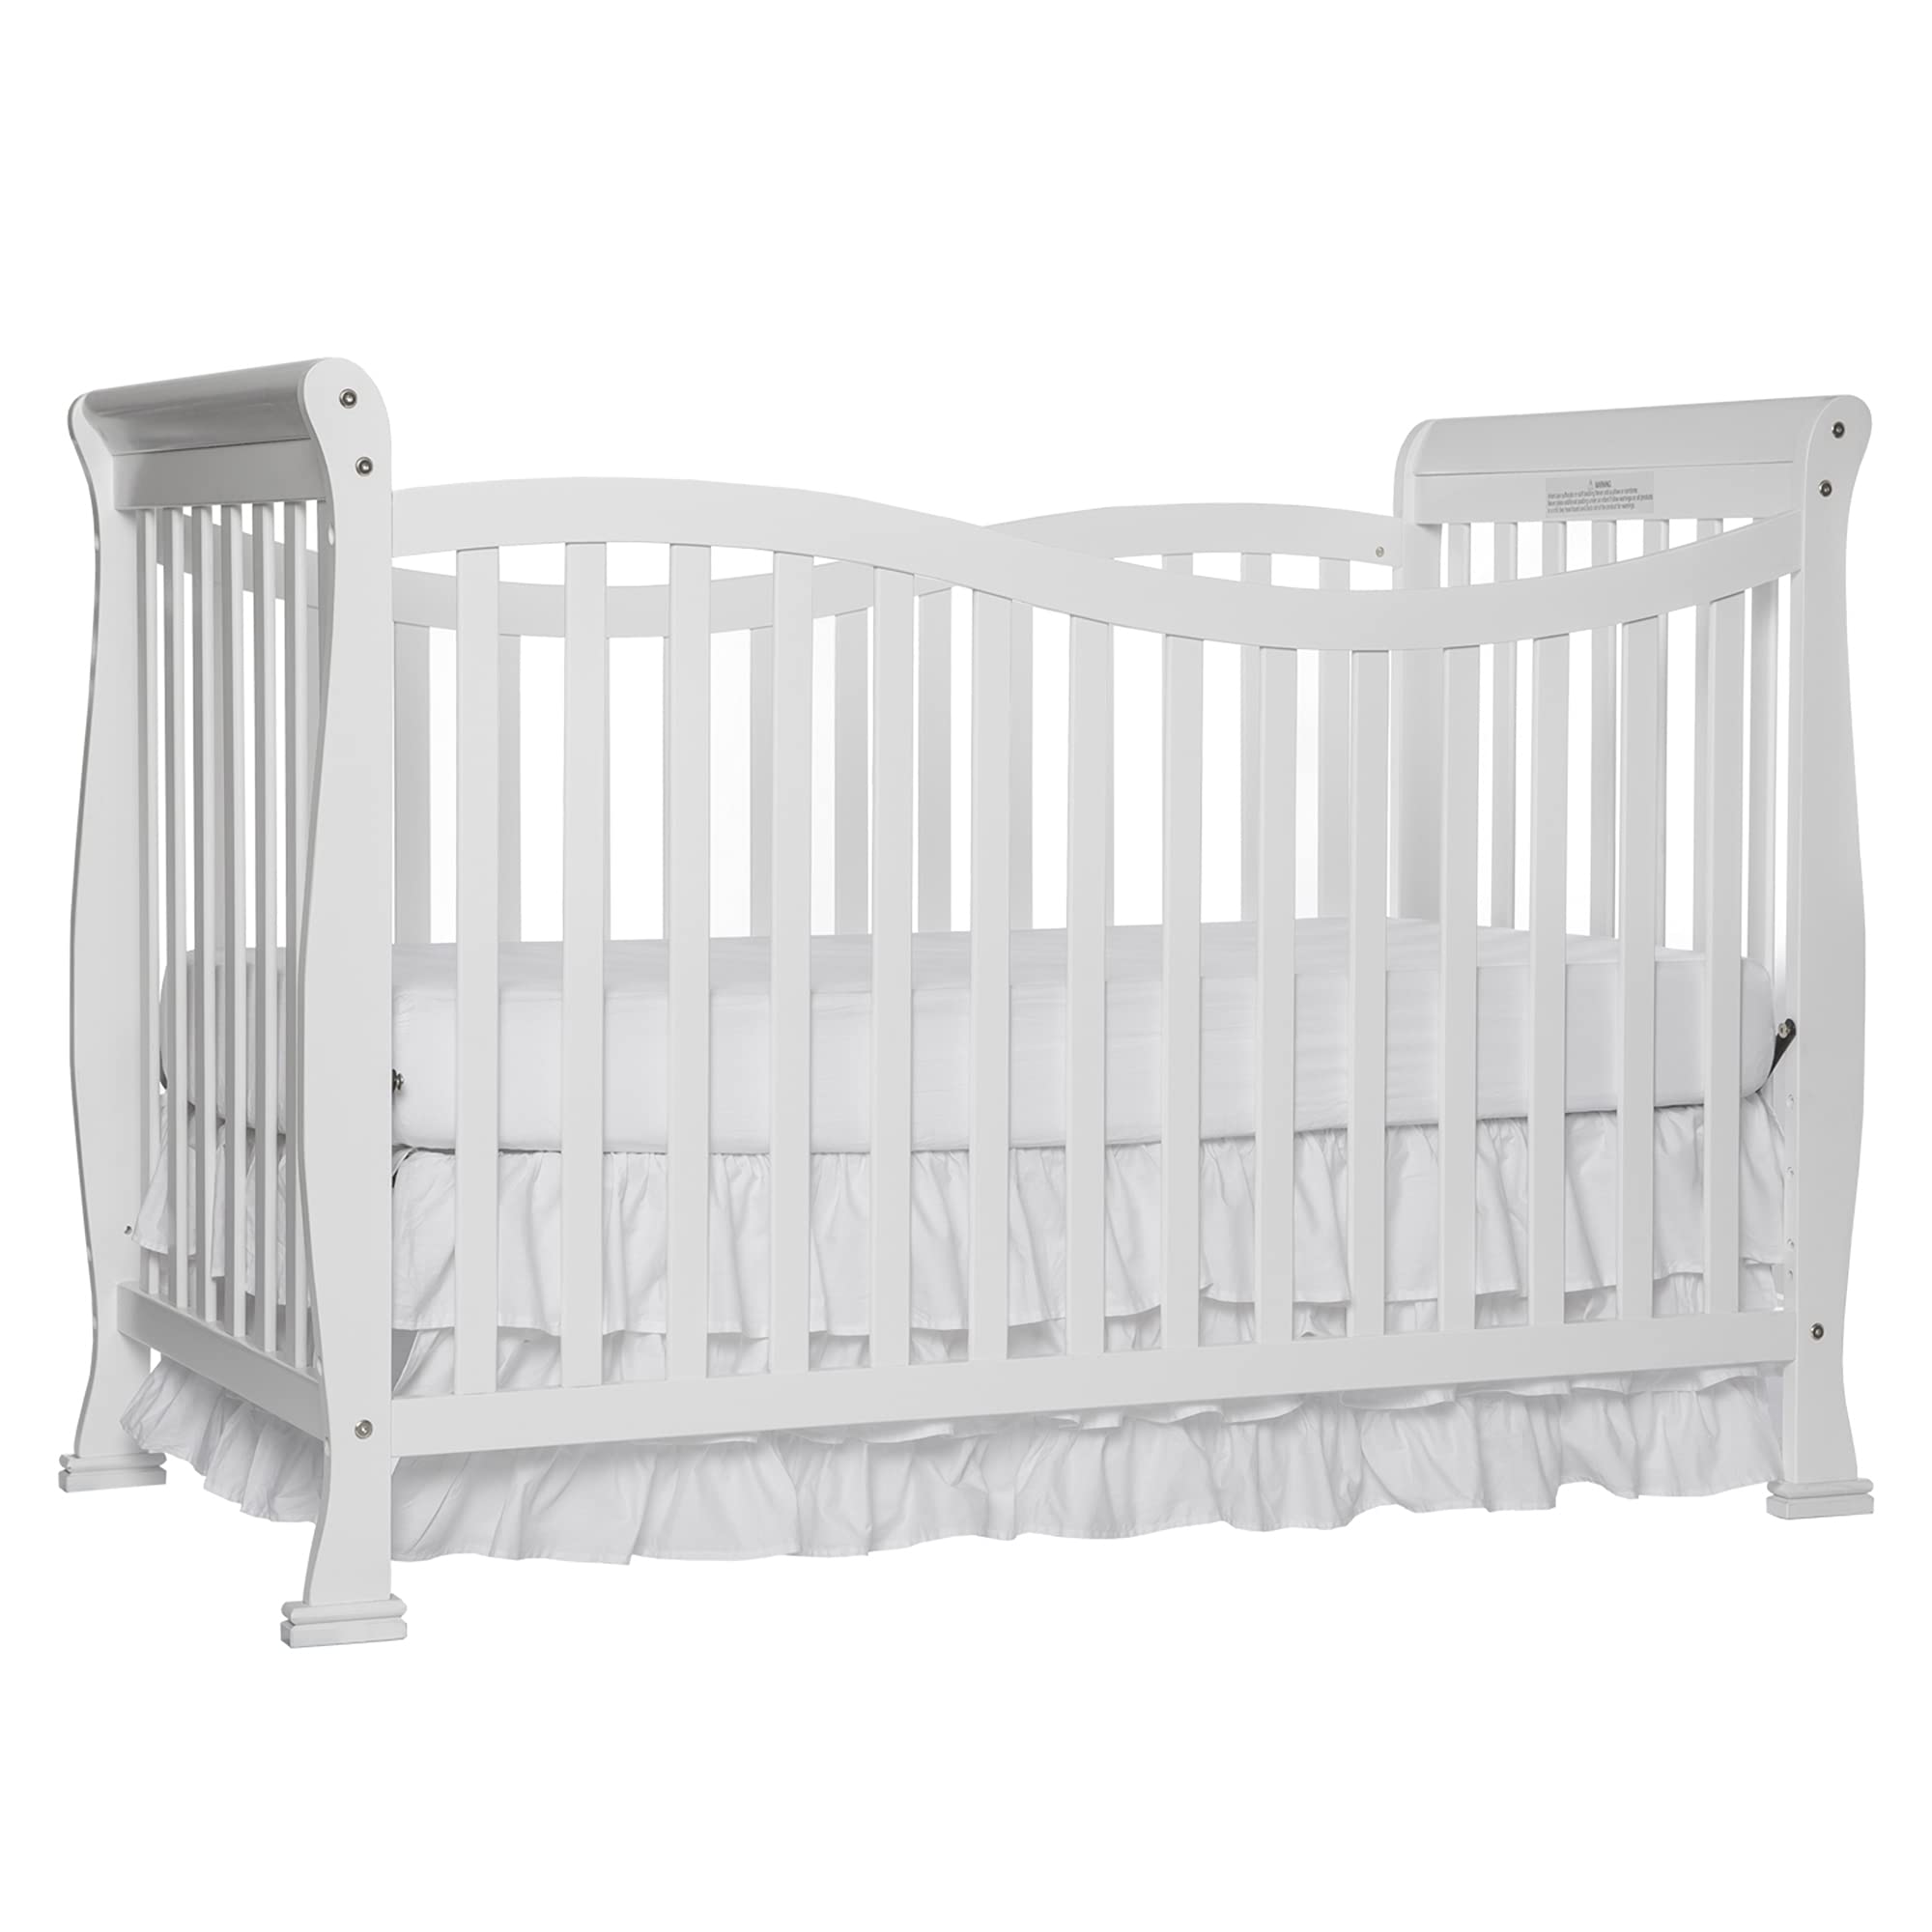 Dream On Me Violet 7-In-1 Convertible Life Style Crib In White, Greenguard Gold Certified, 4 Mattress Height Settings, Made Of Sustainable New Zealand Pinewood